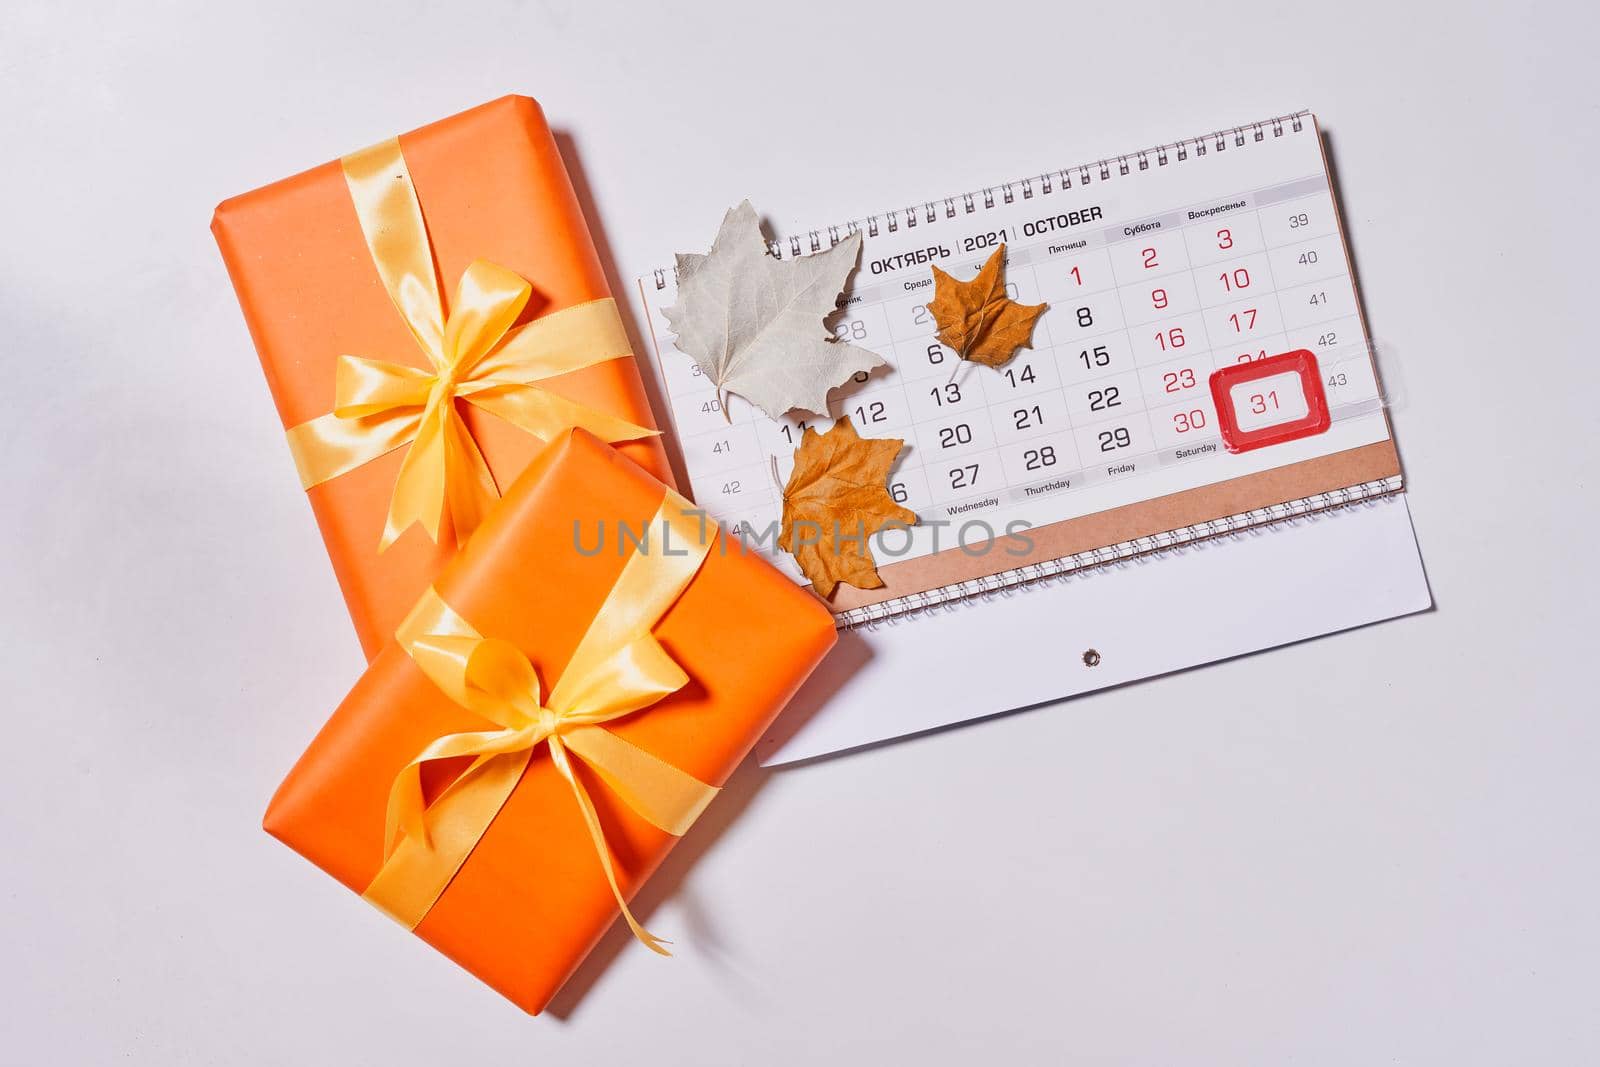 October 2021 monthly calendar and orange giftboxes by golibtolibov